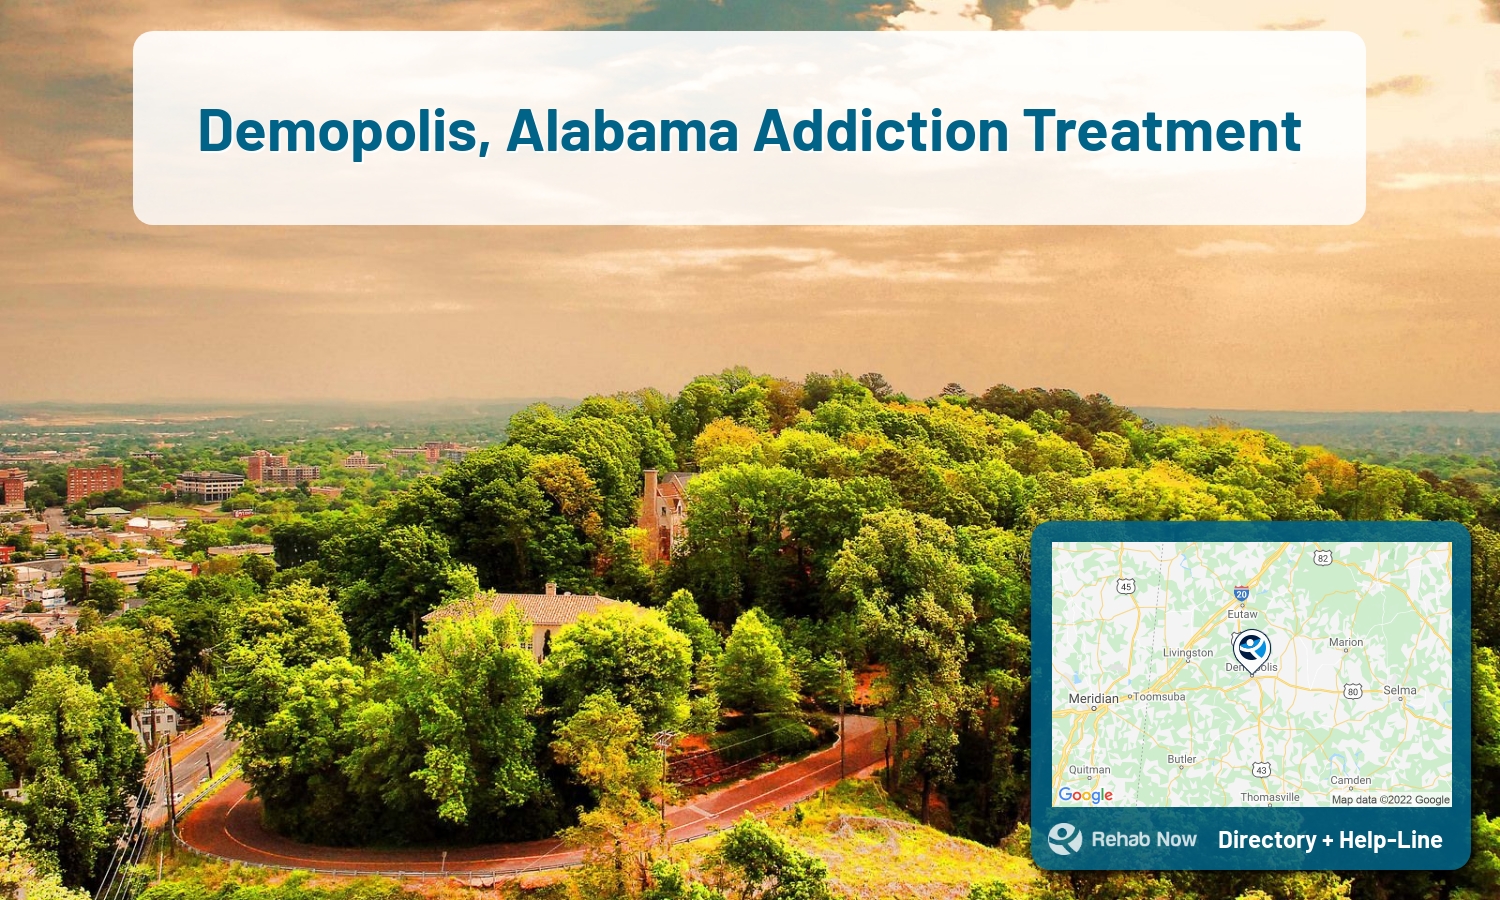 Demopolis, AL Treatment Centers. Find drug rehab in Demopolis, Alabama, or detox and treatment programs. Get the right help now!